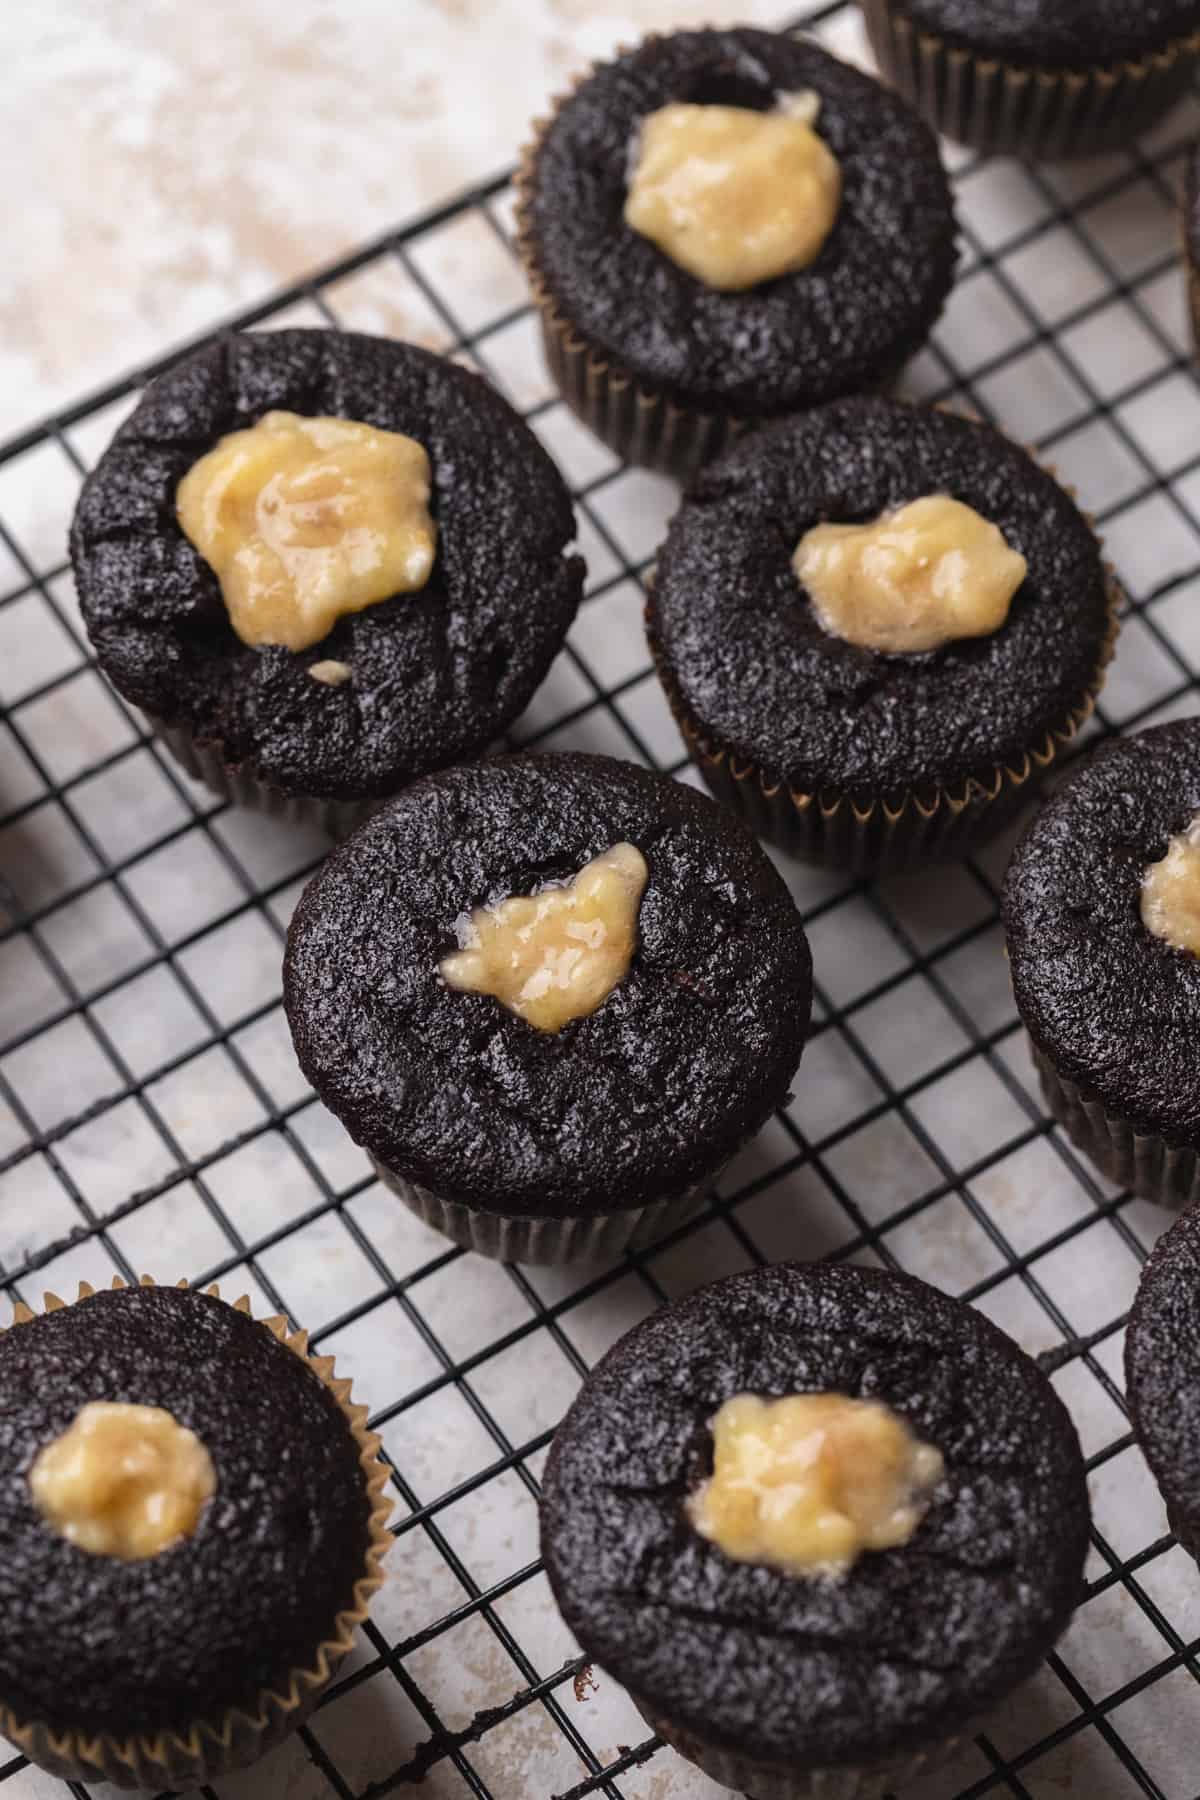 Chocolate cupcakes filled with banana puree.